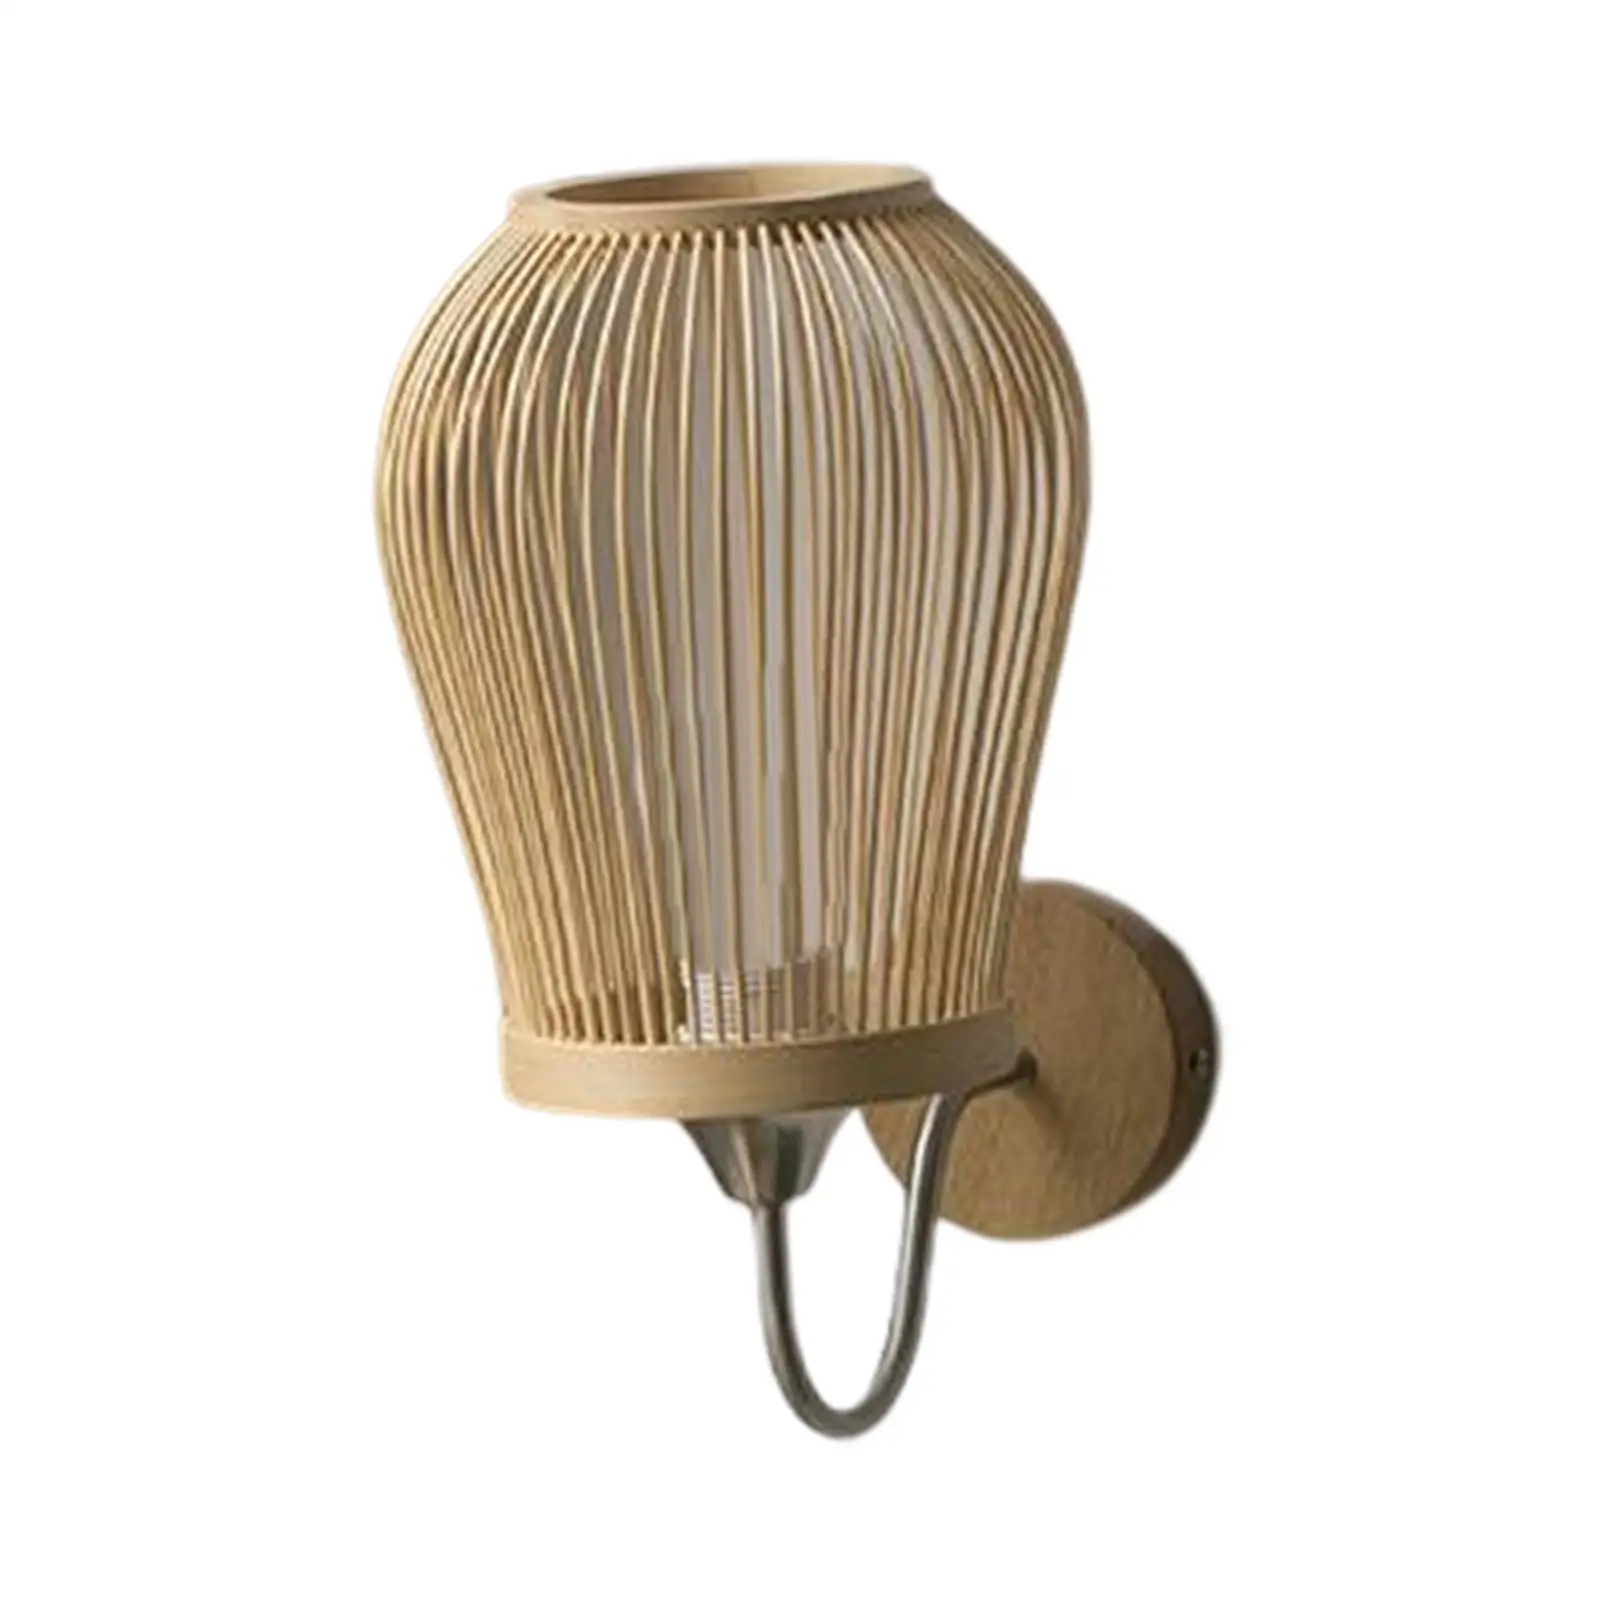 Bamboo Wall Mounted Sconce Lamp Light Vintage Style Lighting E27 Base Decorative Farmhouse for Hotel Study Bedroom Decor